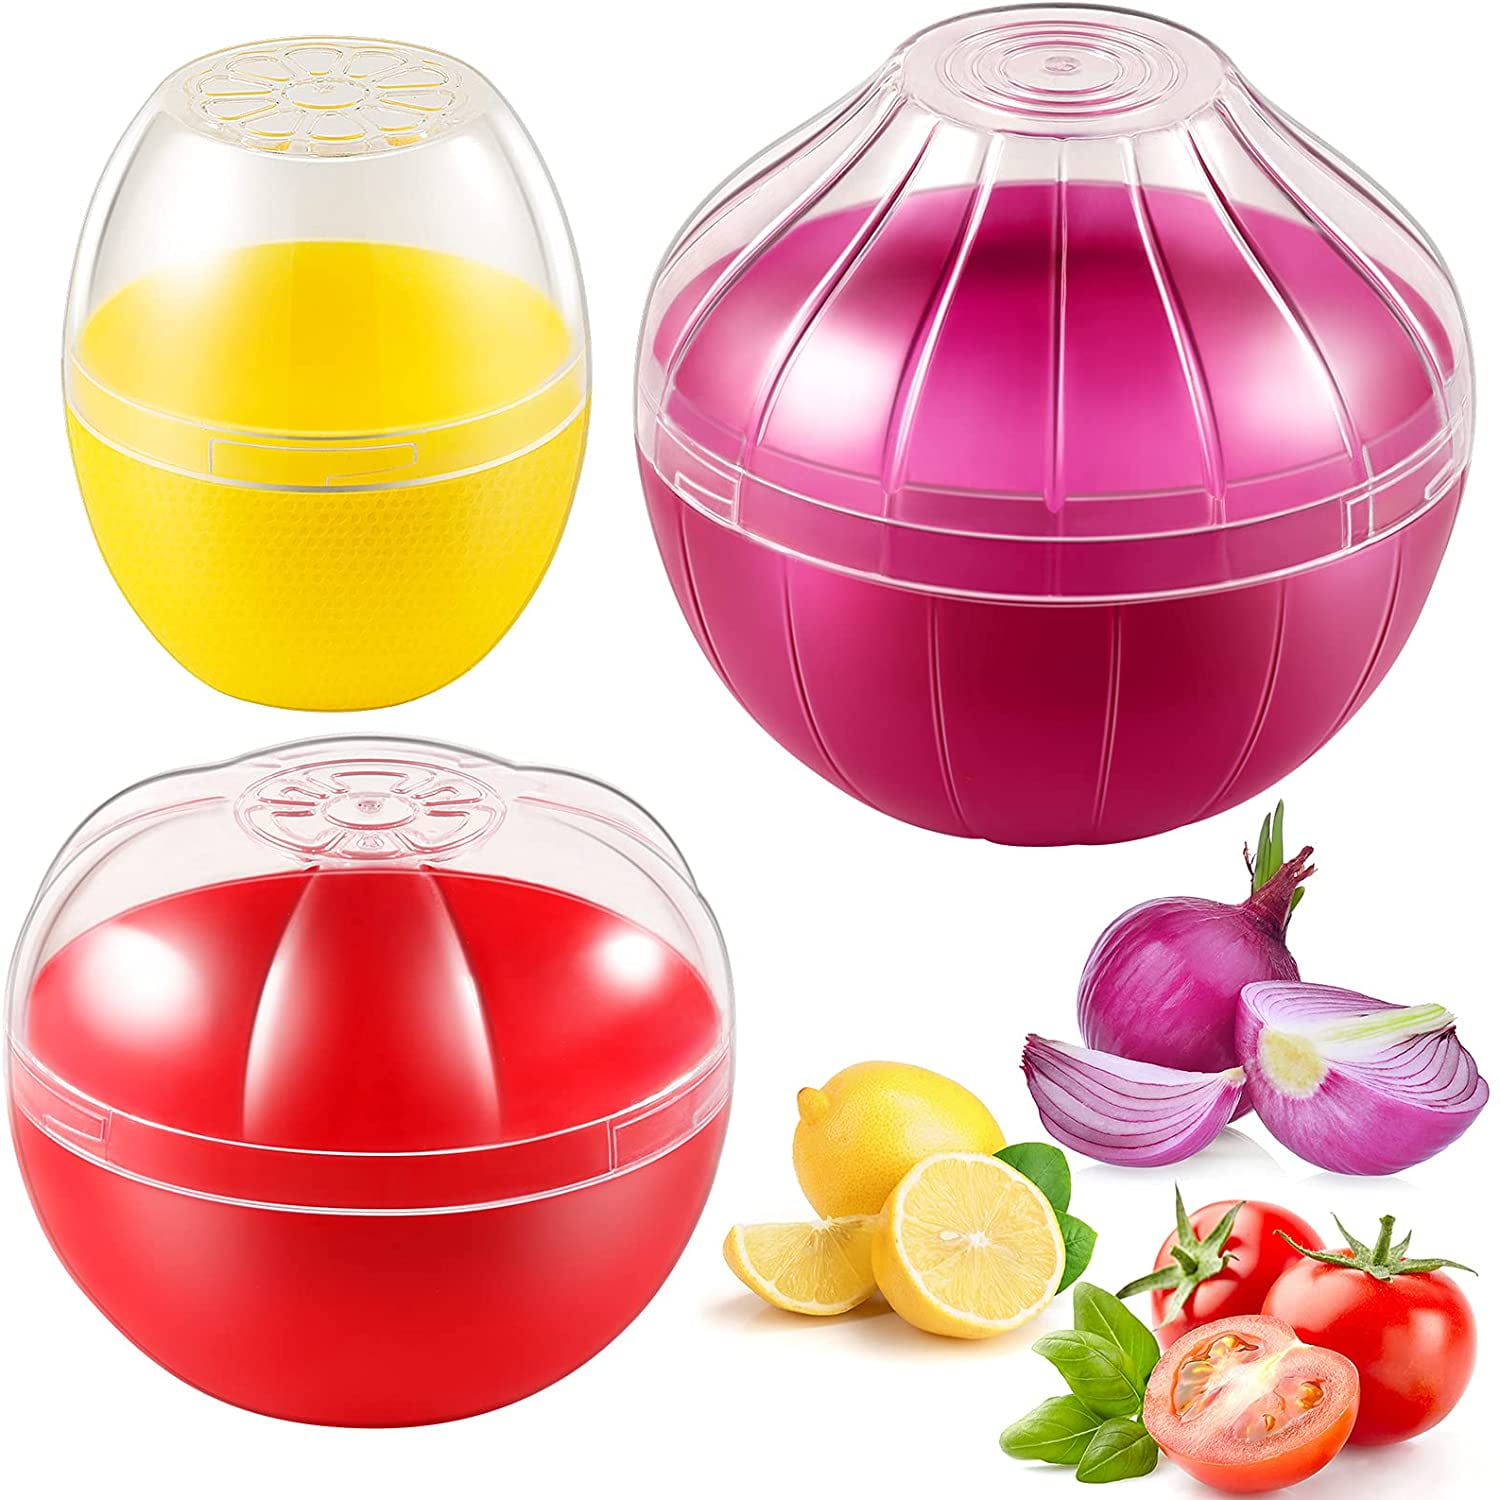 VEGETABLE CONTAINERS ONION LEMON PEPPER KEEPER FOOD SAVERS KITCHEN SALE